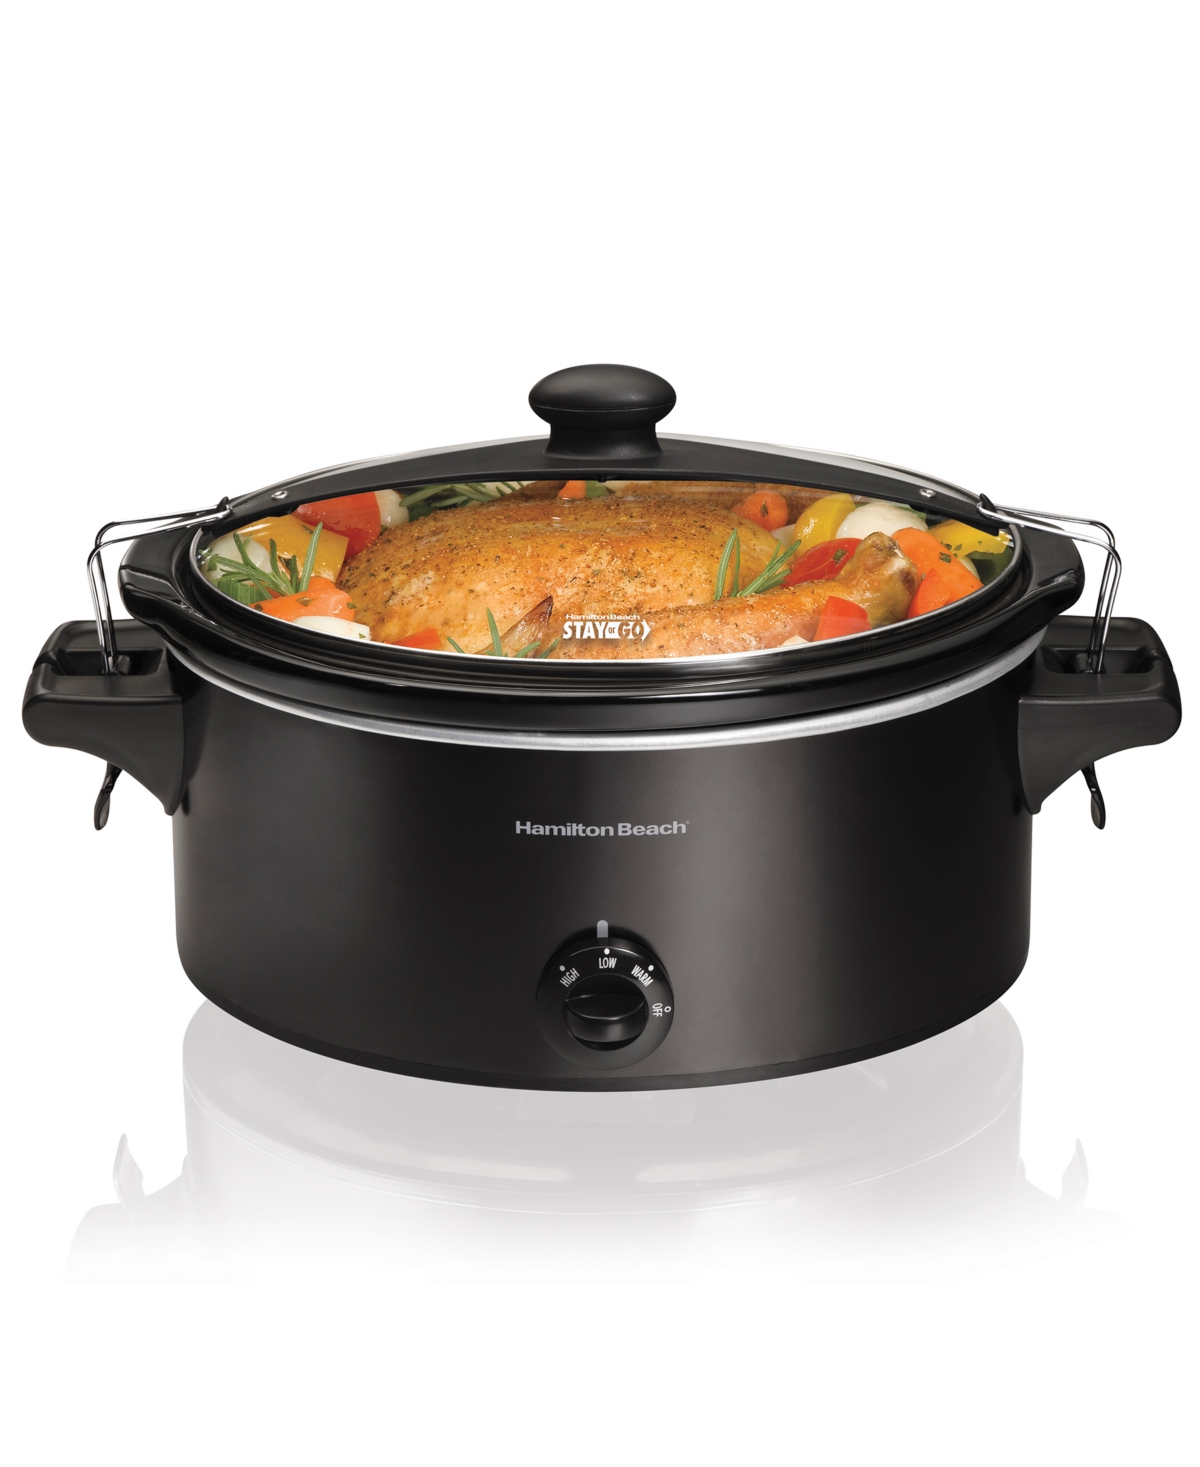 Manual Stay or Go 6-Qt. Slow Cooker - Black